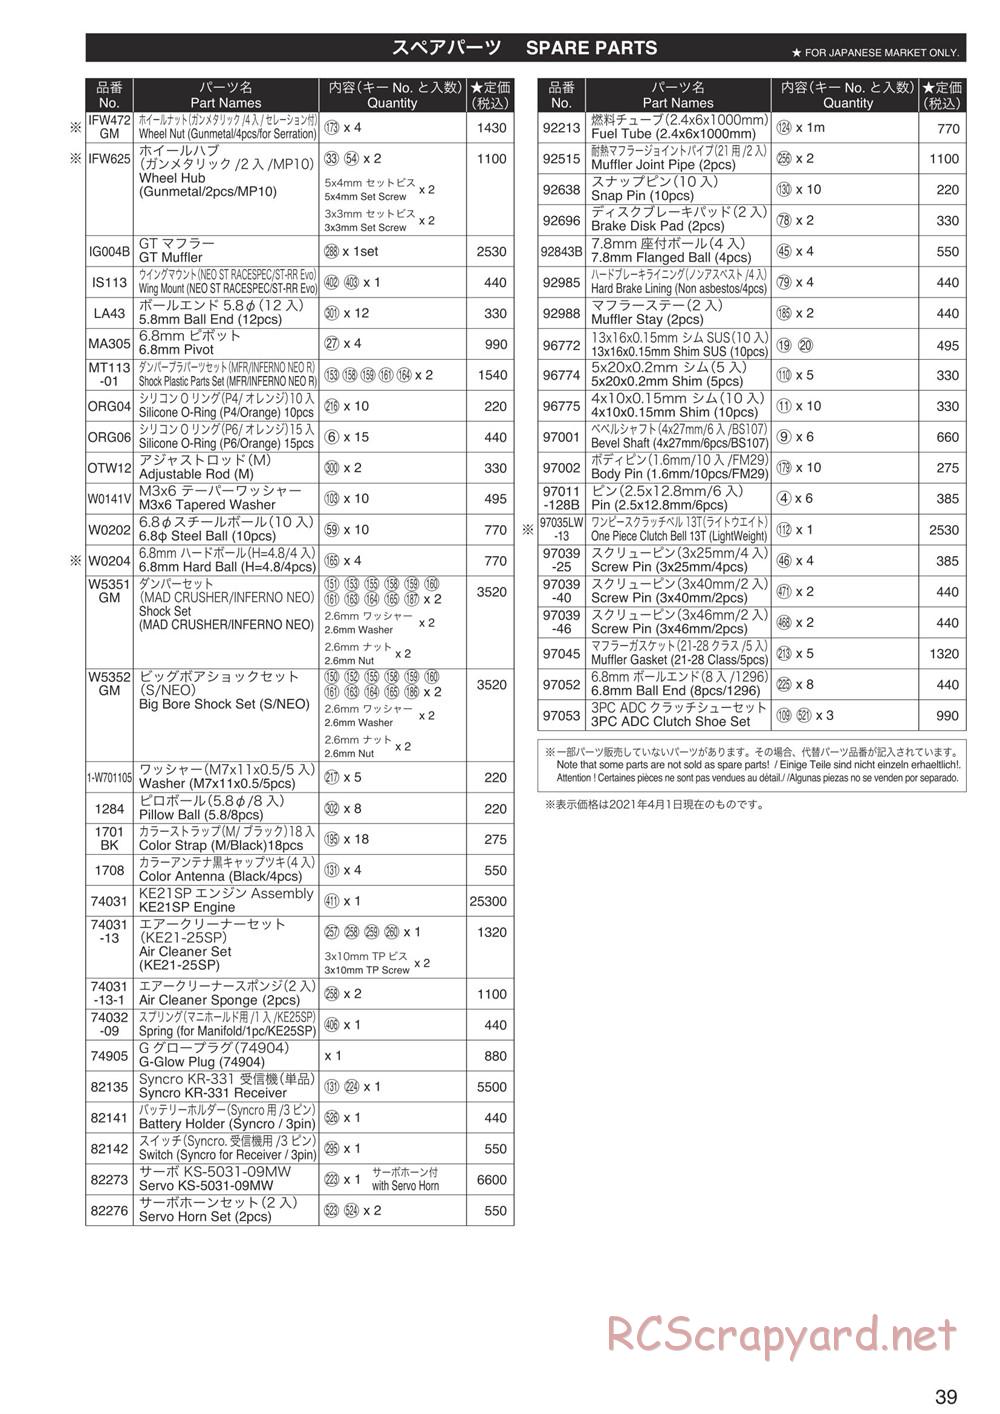 Kyosho - Inferno Neo 3.0 - Manual - Page 38